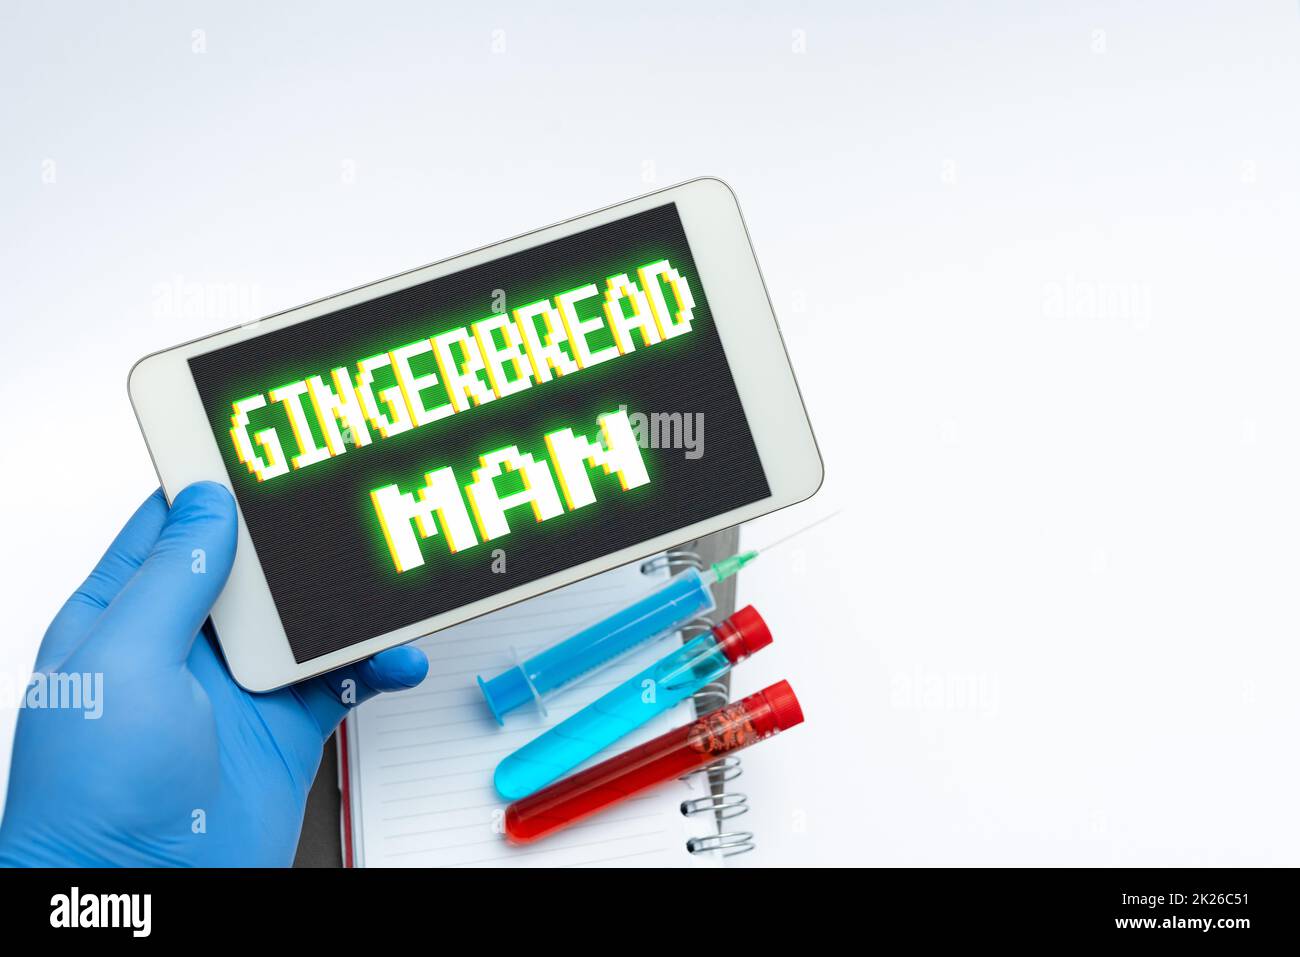 Sign displaying Gingerbread Man. Internet Concept cookie made of gingerbread usually in the shape of human Advance Medical Technology Laboratory Testing New Virus Medicine Stock Photo